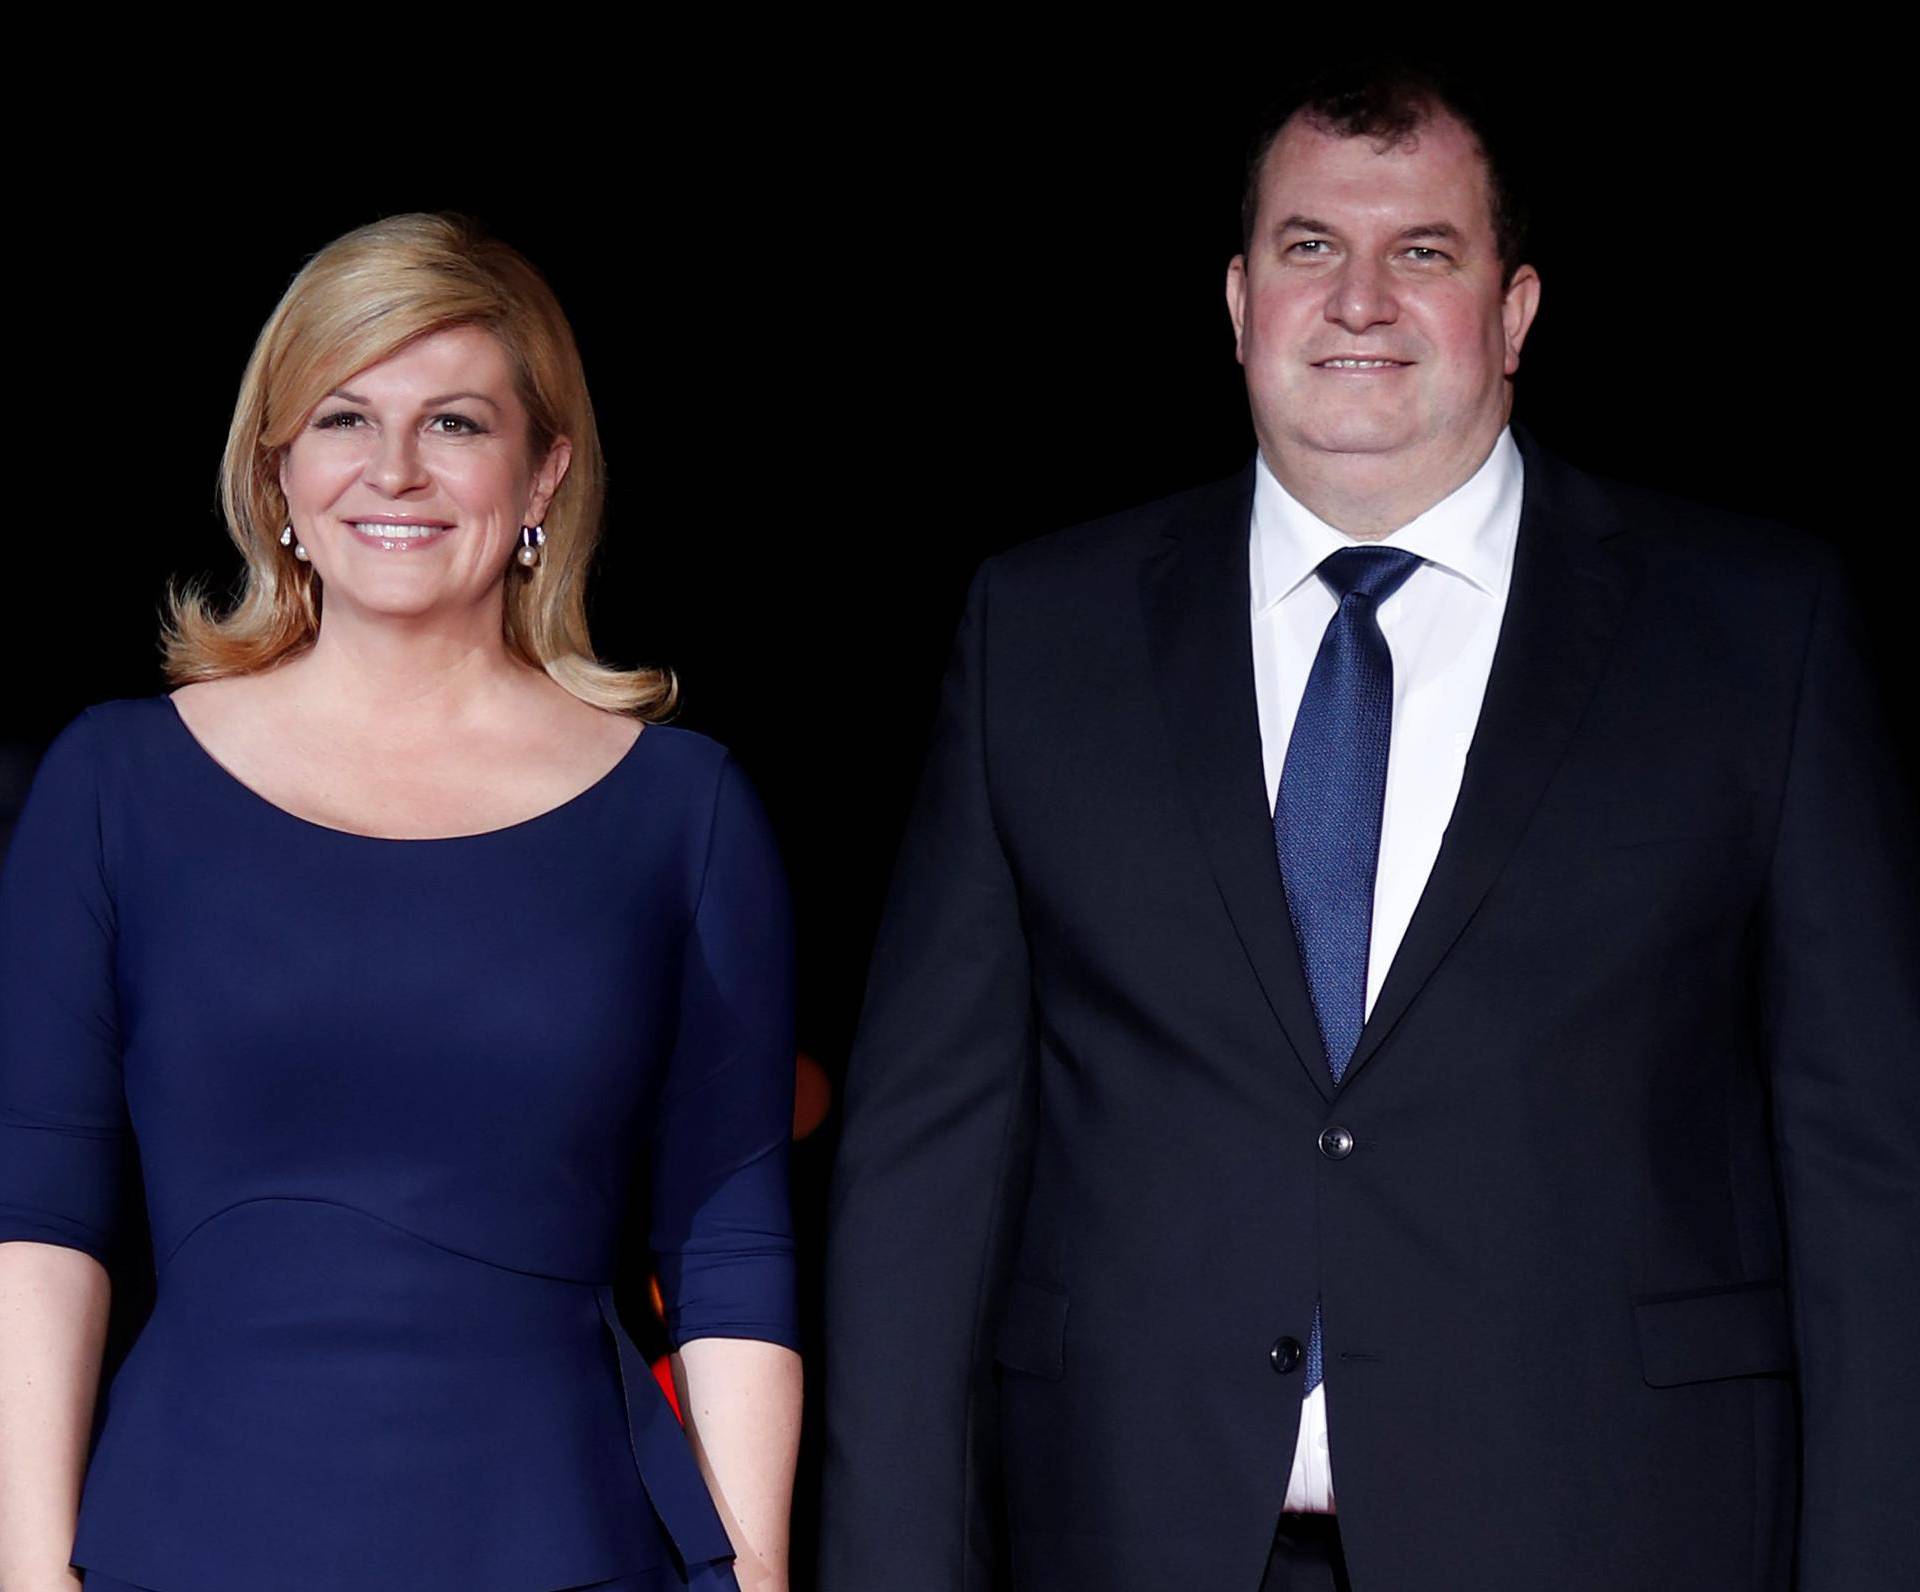 Croatian President Kolinda Grabar-Kitarovic arrives to attend a visit and a dinner at the Orsay Museum in Paris